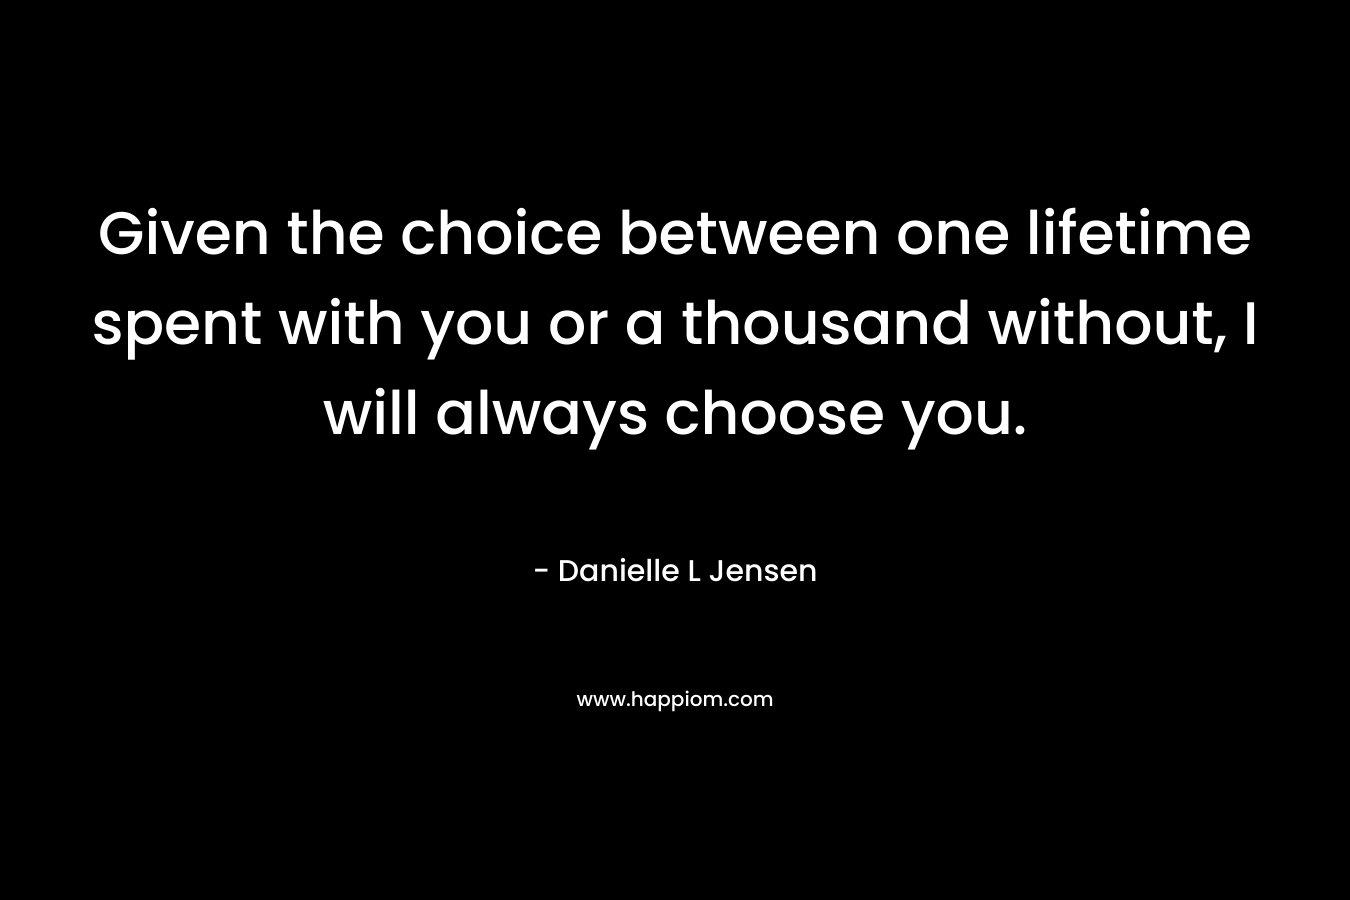 Given the choice between one lifetime spent with you or a thousand without, I will always choose you.